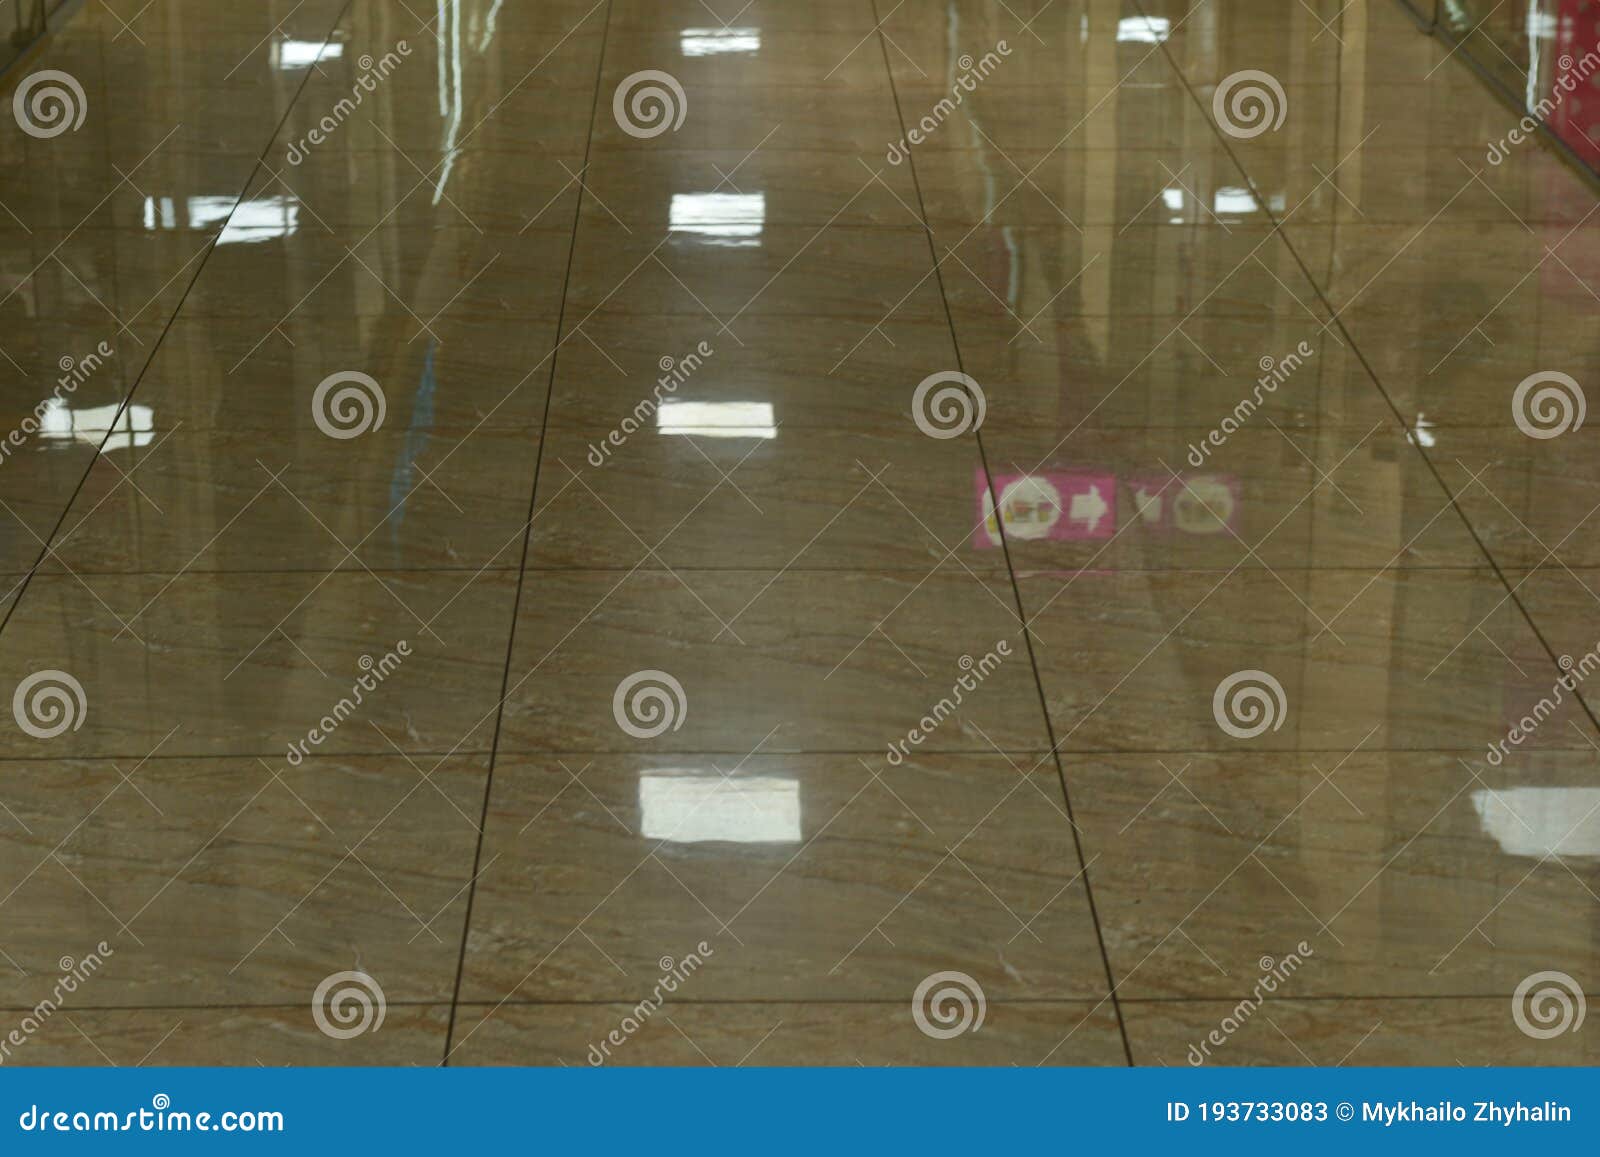 the floor on one of the floors of the modern store is paved with shiny tiles